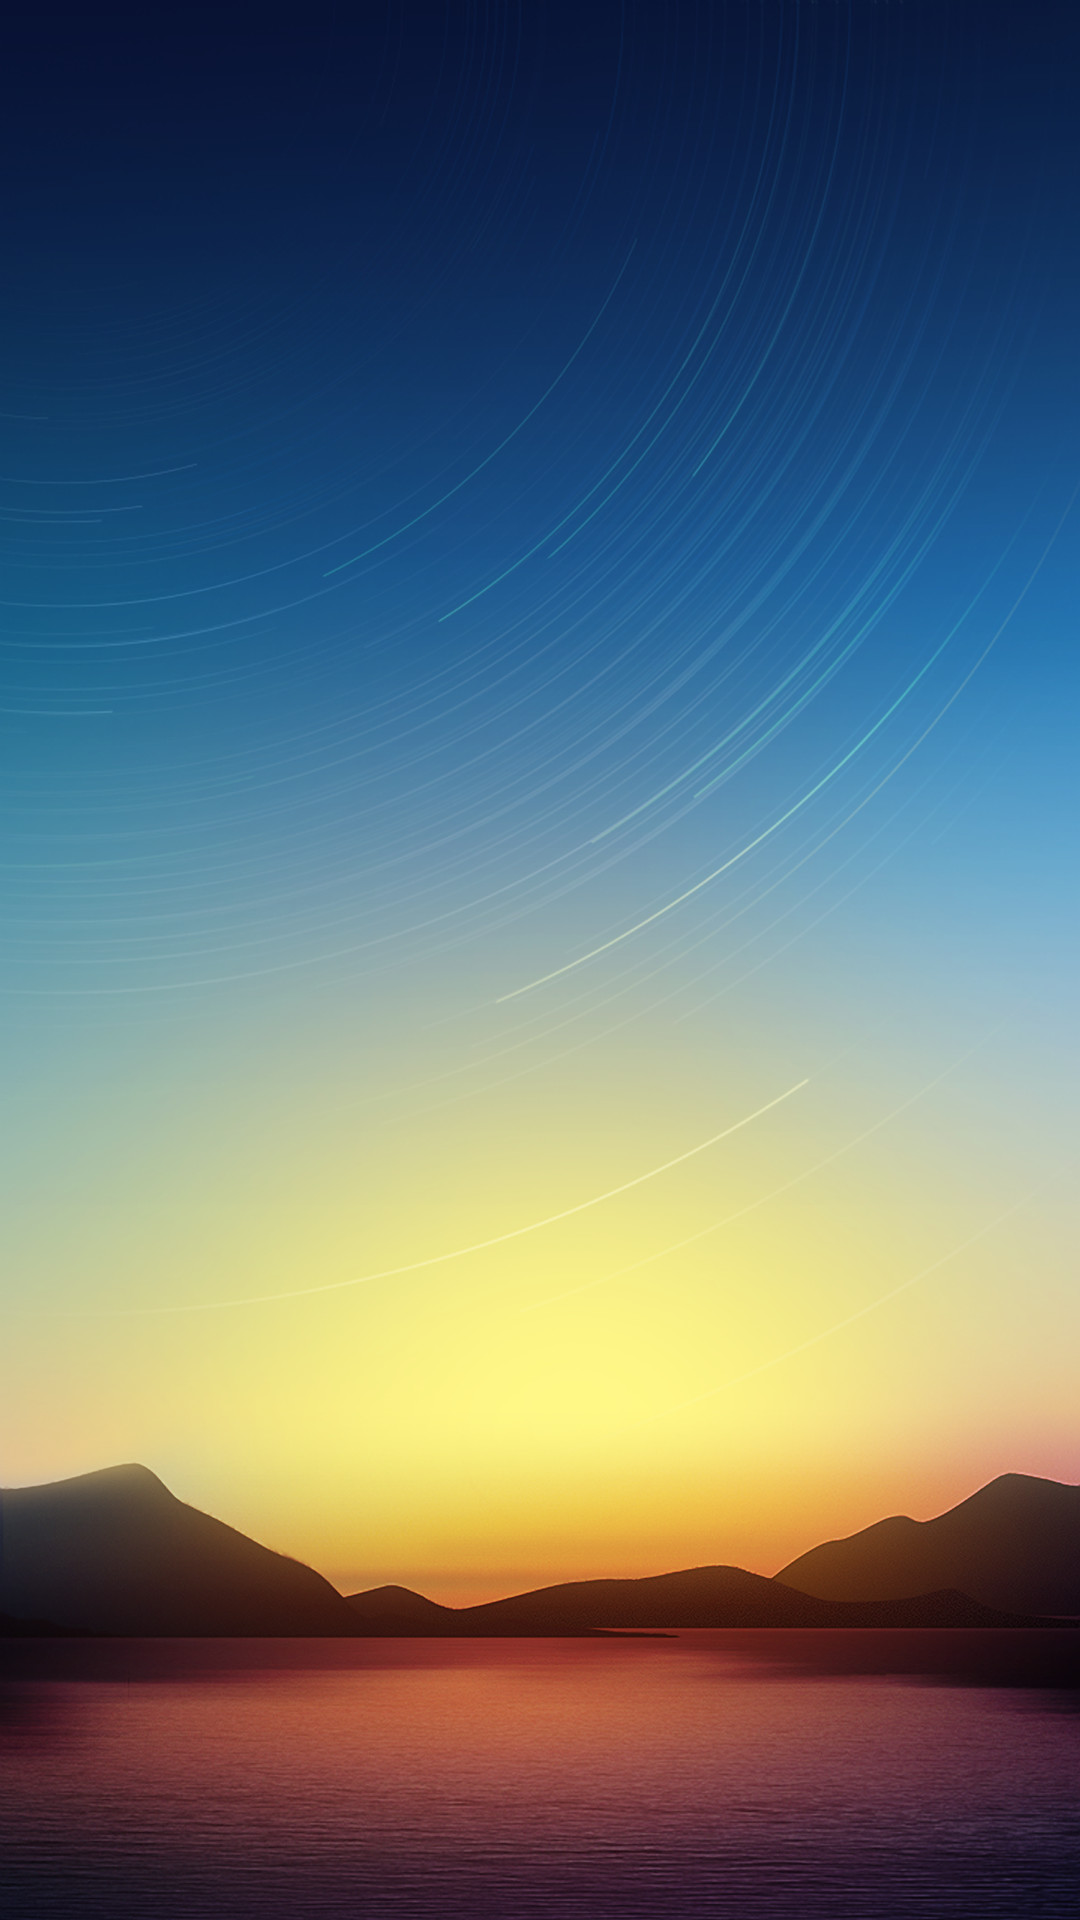 1080x1920 Windows phone hd for mobile phone wallpapers  sunset.